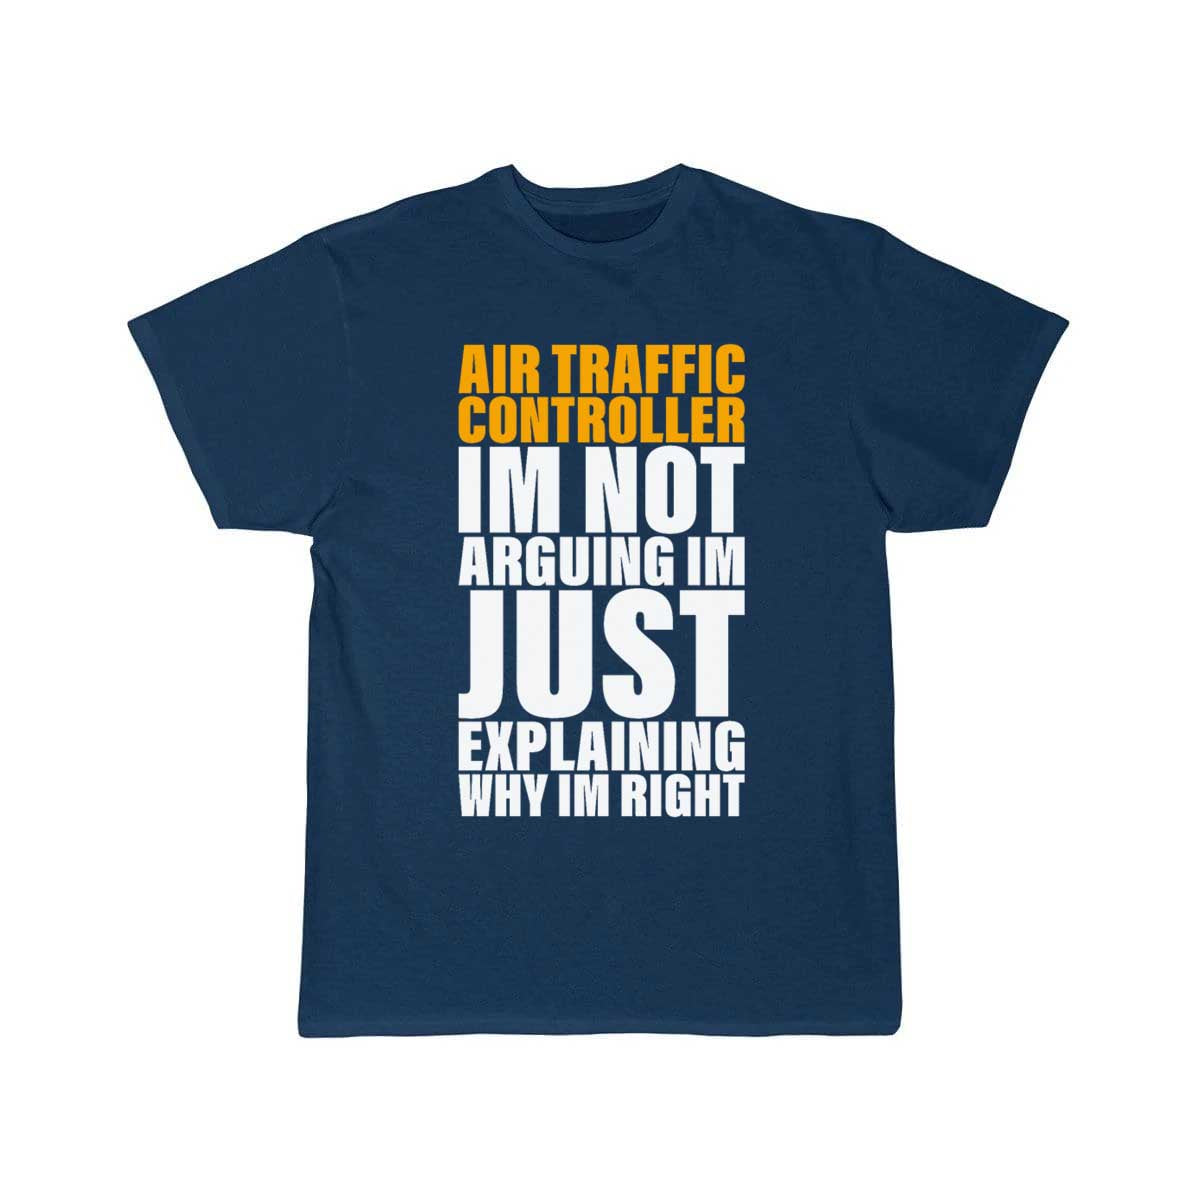 Air Traffic Controller Are Always Right for ATC T-SHIRT THE AV8R